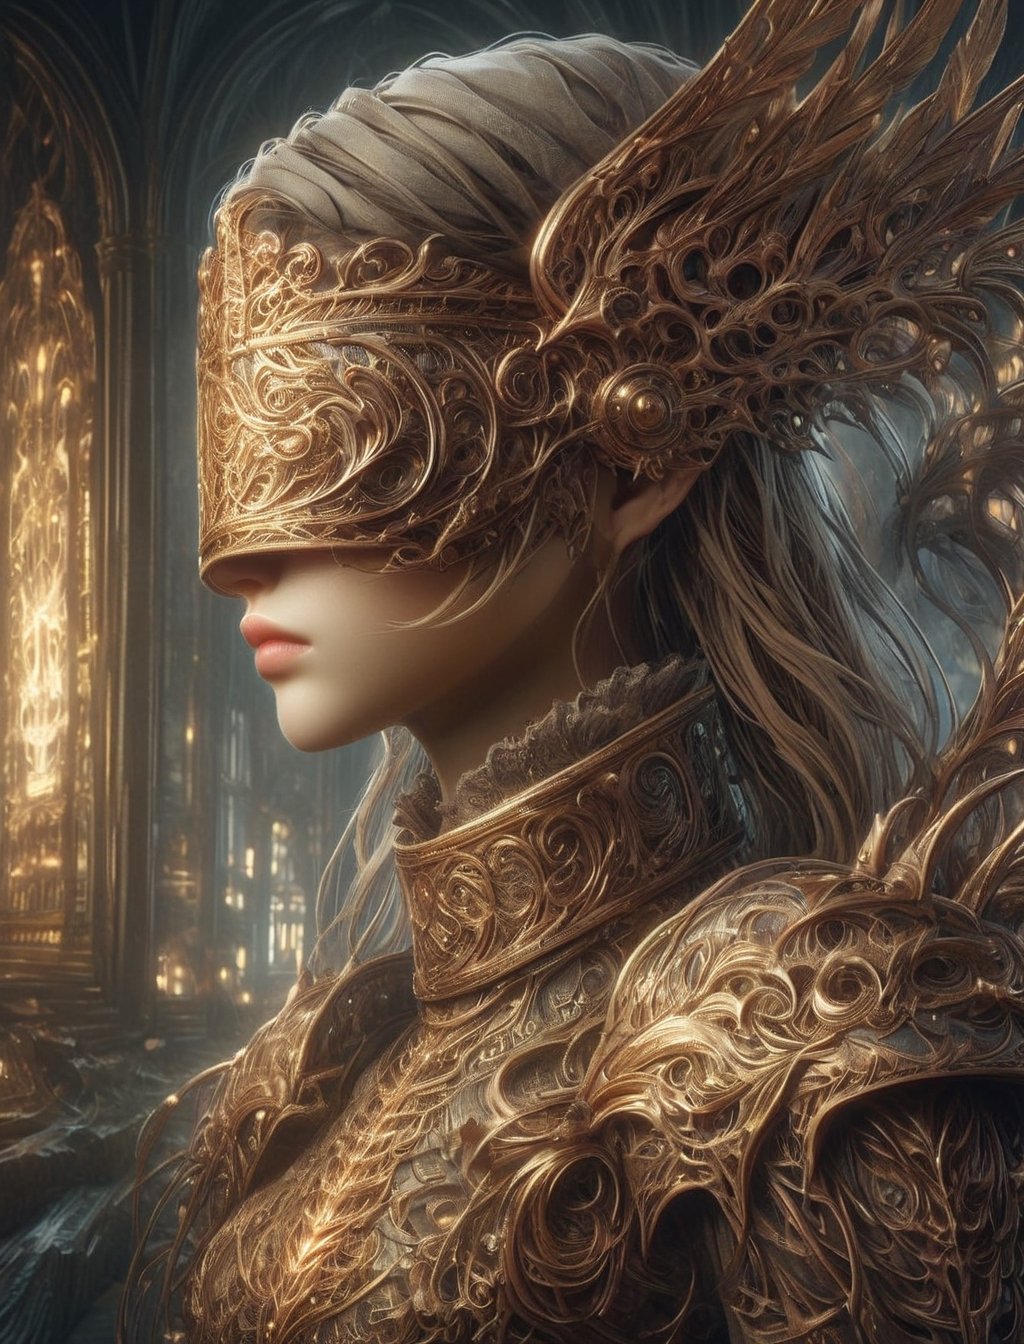 "Dark romance fantasy, close up of a woman with sword wearing dragon bone armor standing above a city, an army looking up at her, embers", bones, ribcage style armor, eldritch, dracolich-like armor, wavy golden dark blonde hair, Masterpiece, Intricate, Insanely Detailed, Art by lois van baarle, todd lockwood, chris rallis, anna dittmann, Kim Jung Gi, Gregory Crewdson, Yoji Shinkawa, Guy Denning, smooth, natural Chiaroscuro, subsurface scattering vfx, actionpainting, best quality, smooth finish, masterpiece,DracolichXL24,art_booster,LegendDarkFantasy,ellafreya,renny the insta girl,real_booster,bl1ndm5k